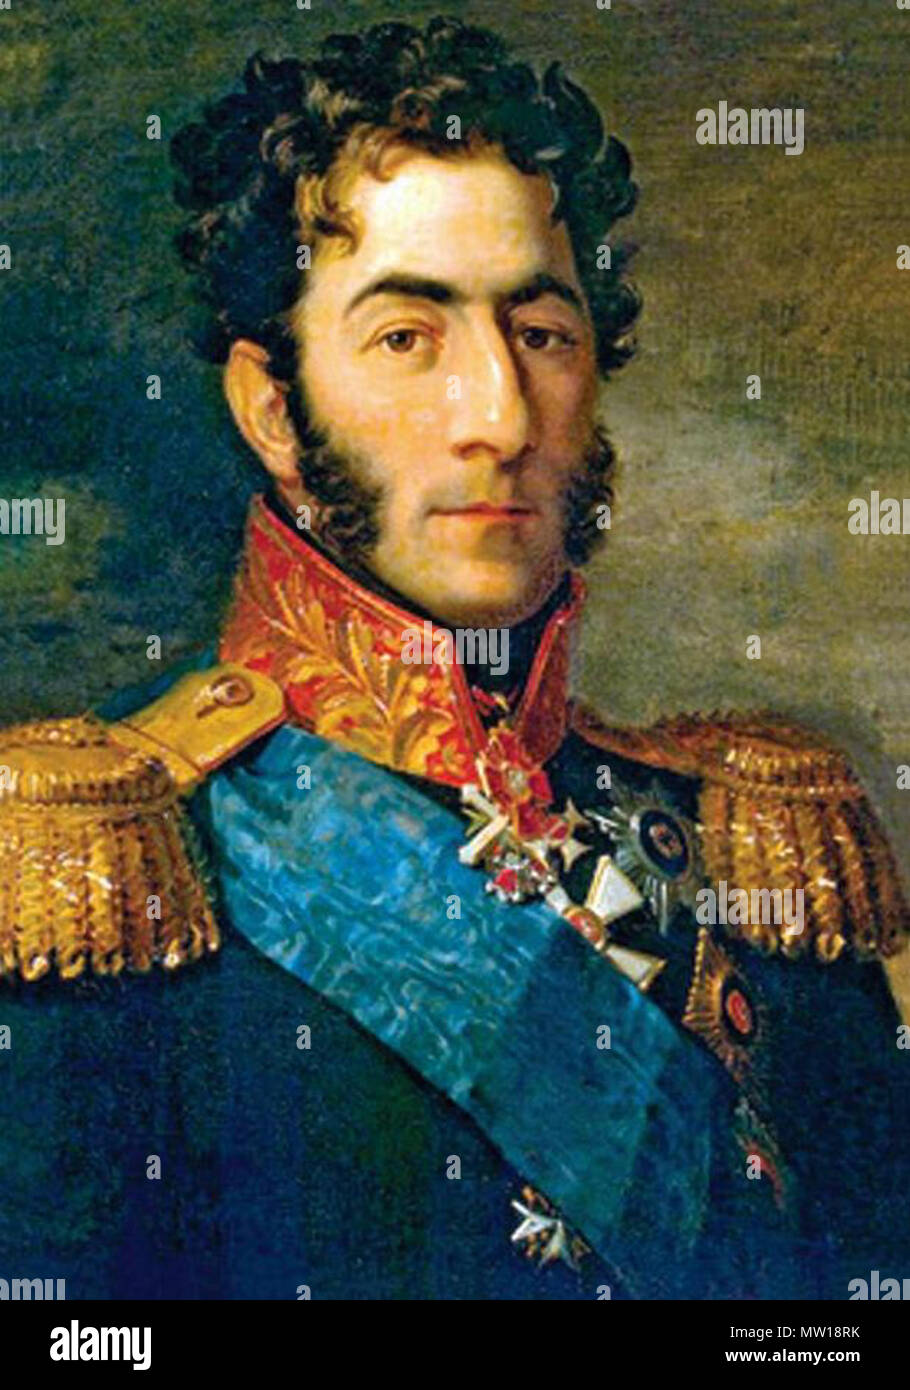 . English: A portrait of Prince Pyotr Bagration from the 19th century . 22 July 2012. Unknown 501 Prince Pyotr Bagration Stock Photo